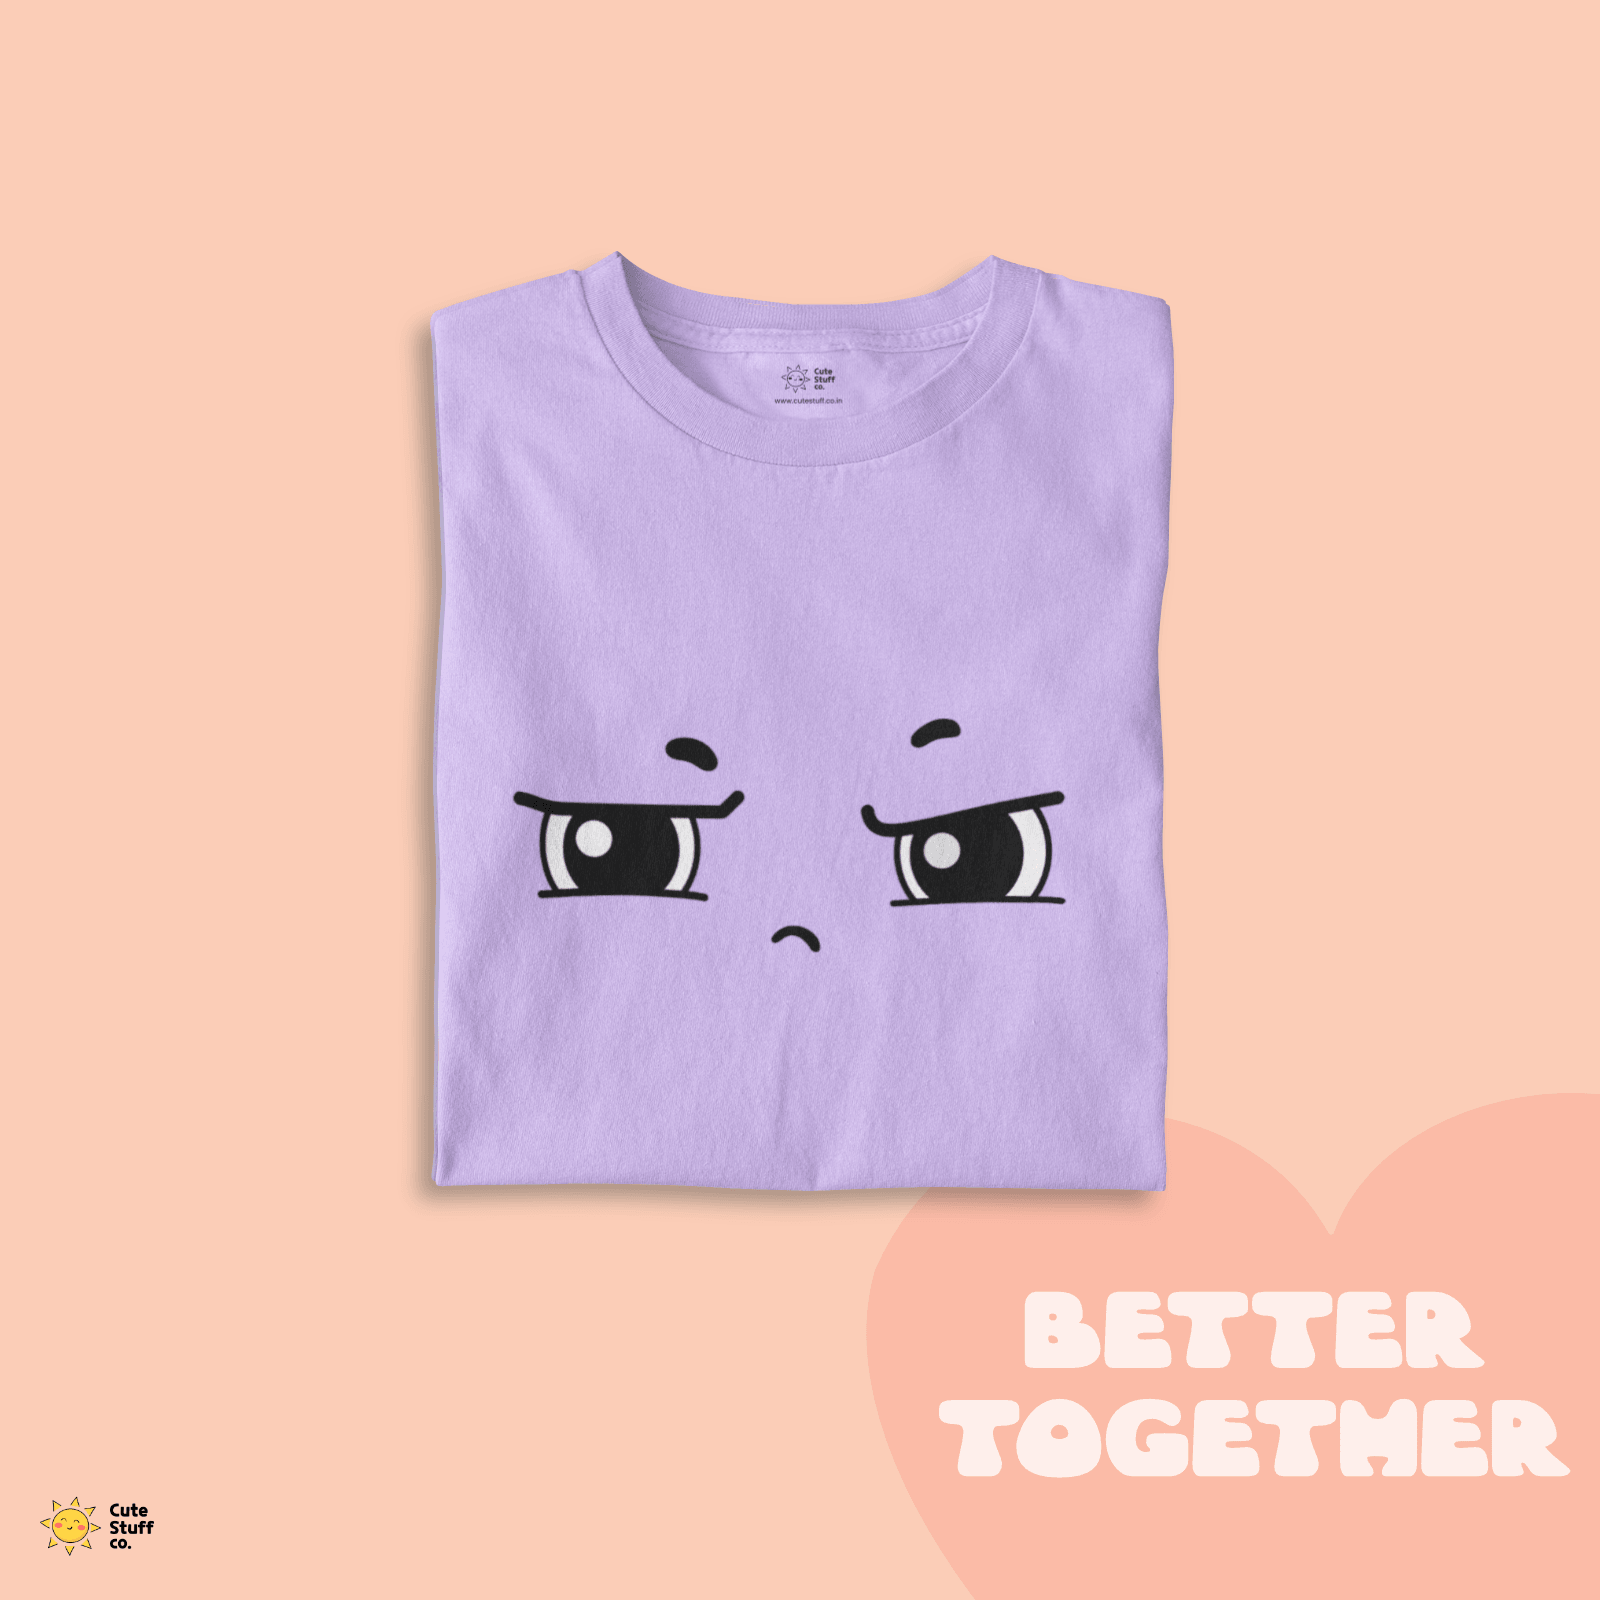 Cheeky Unisex Oversized T-shirts - Better Together